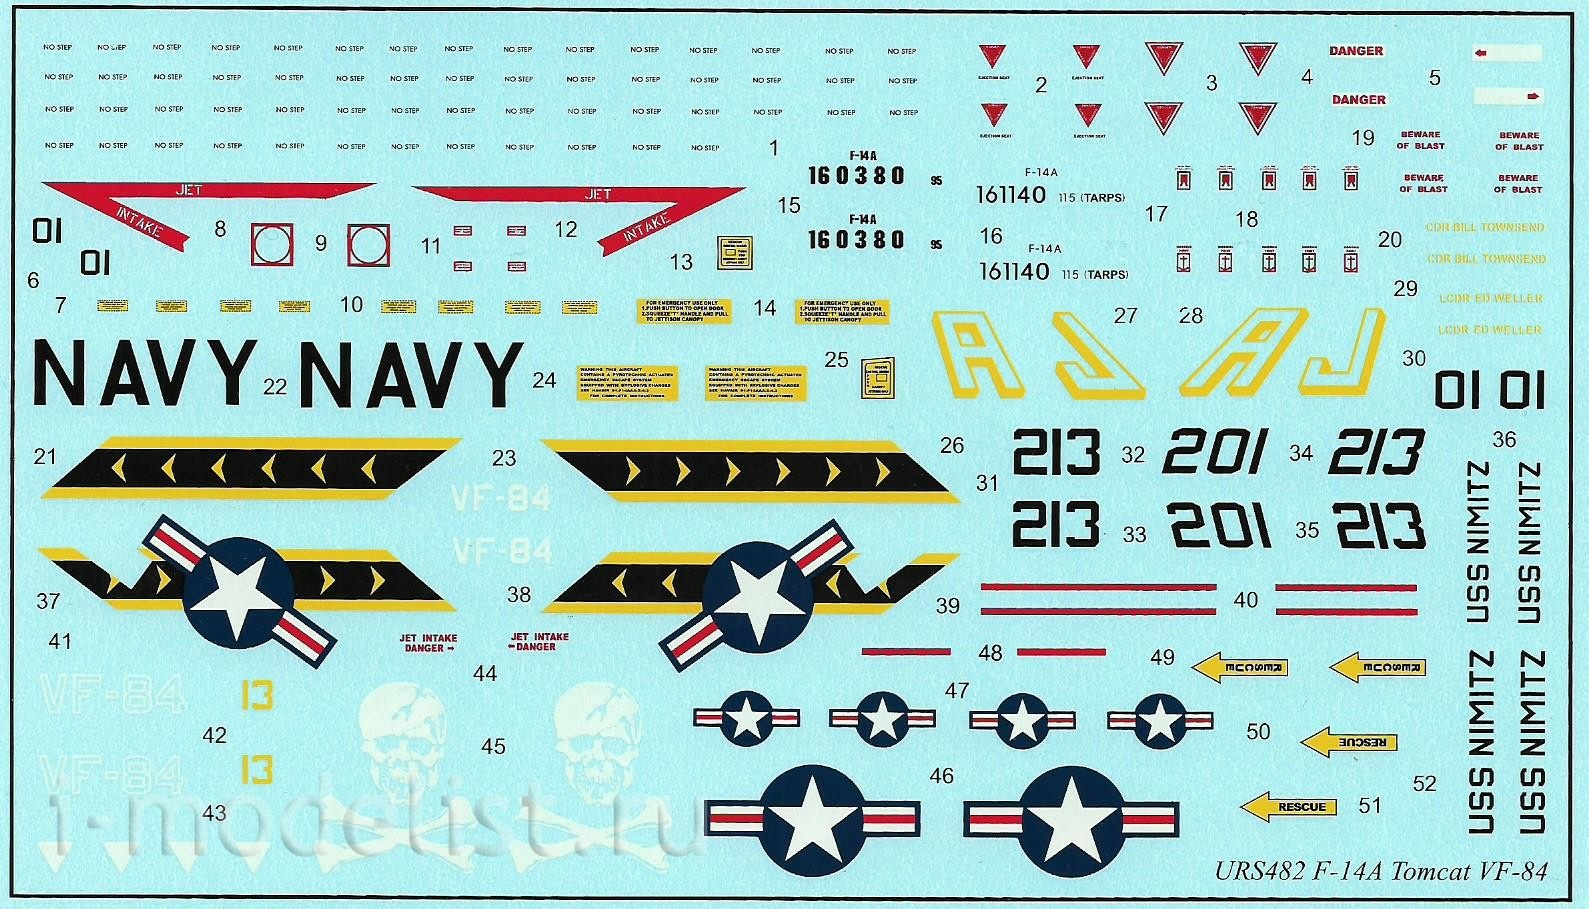 URS482 Sunrise 1/48 Decal for F-14A Tomcat VF-84 Jolly Rogers, with stencil